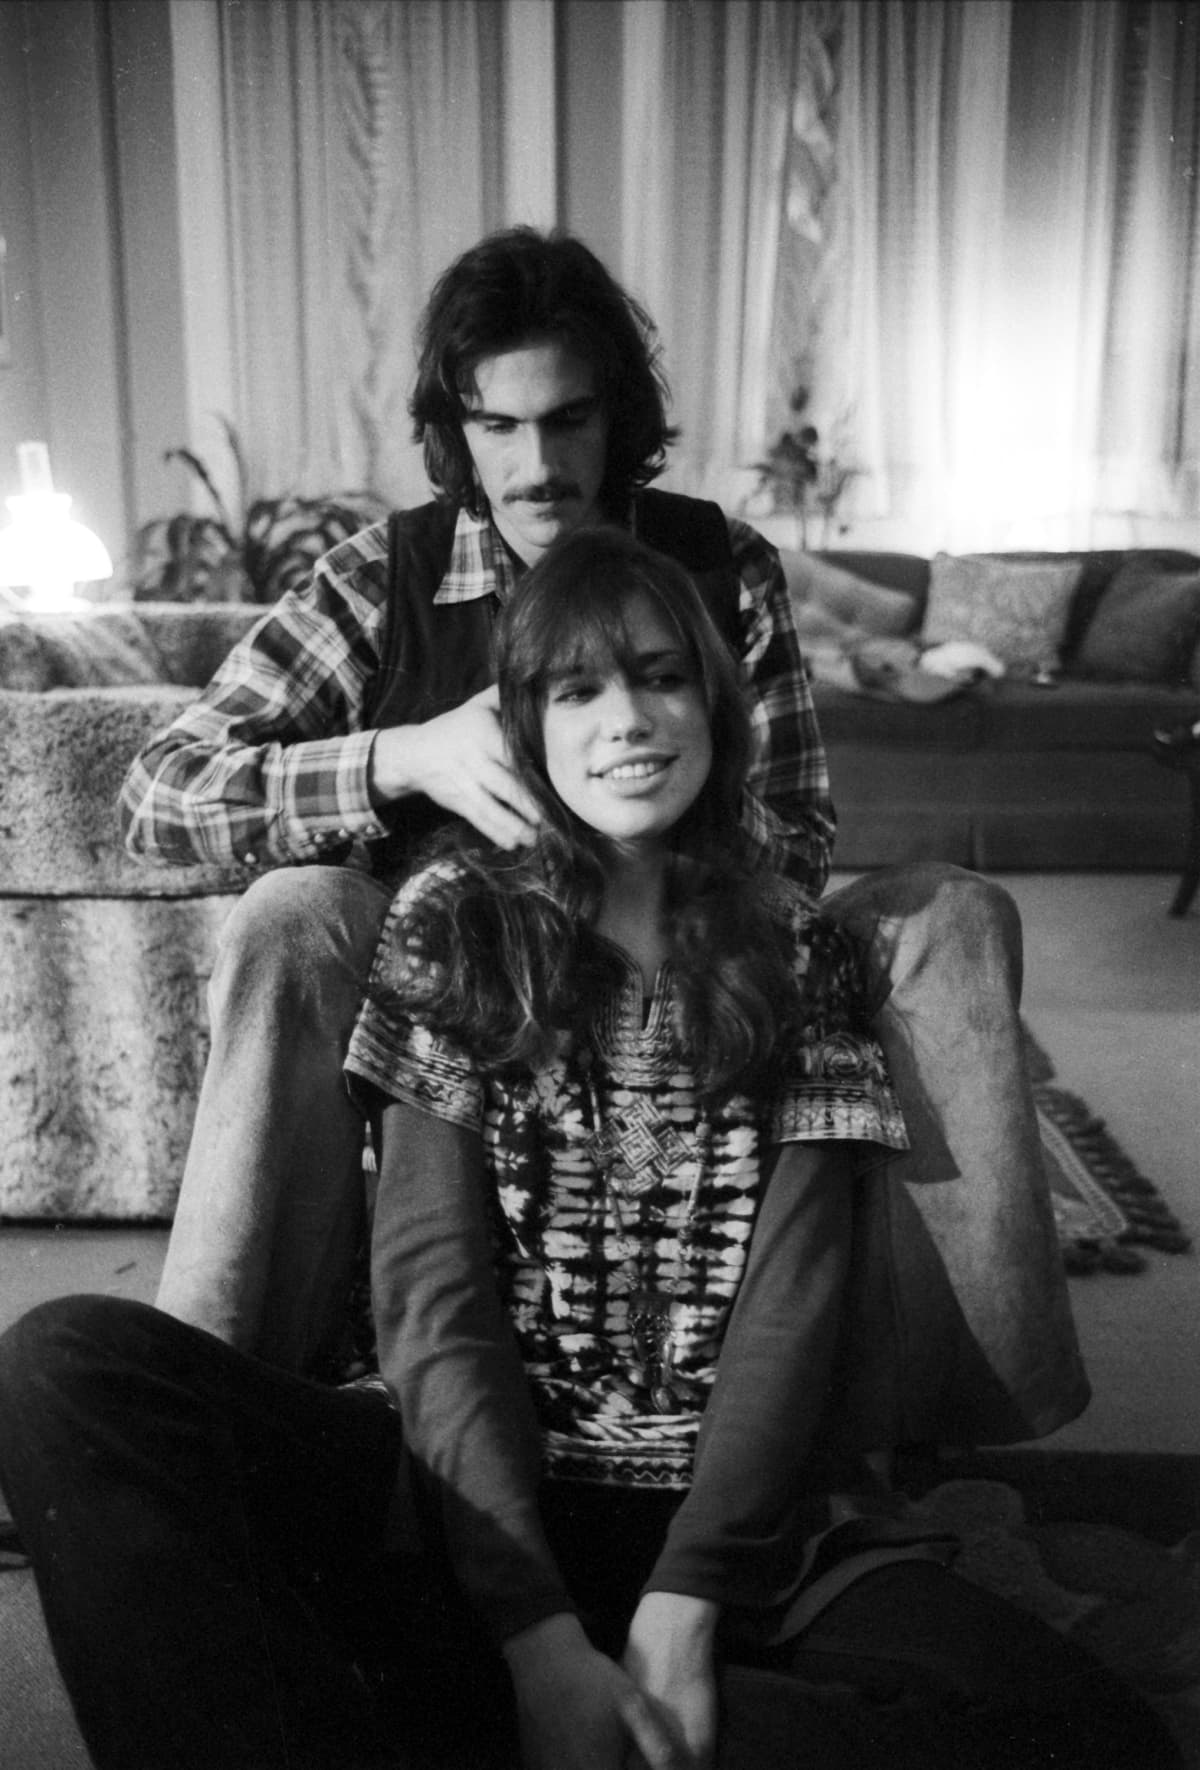 NEW YORK - OCTOBER 13:  Singer/songwriter couple Carly Simon and James Taylor pose for a portrait session at the their home on October 13, 1971 in New York City, New York. (Photo by Michael Ochs Archives/Getty Images)  